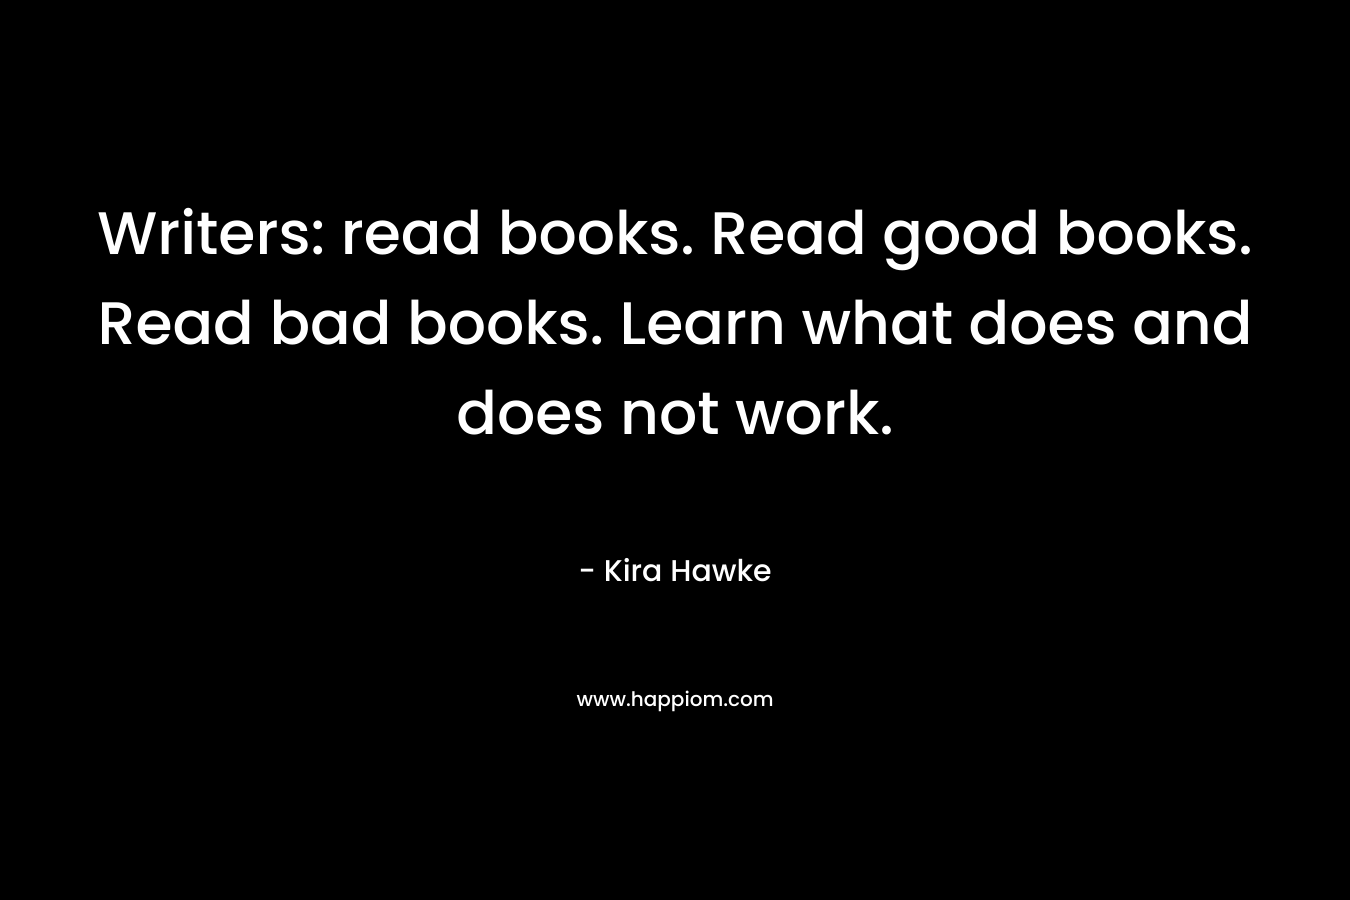 Writers: read books. Read good books. Read bad books. Learn what does and does not work.